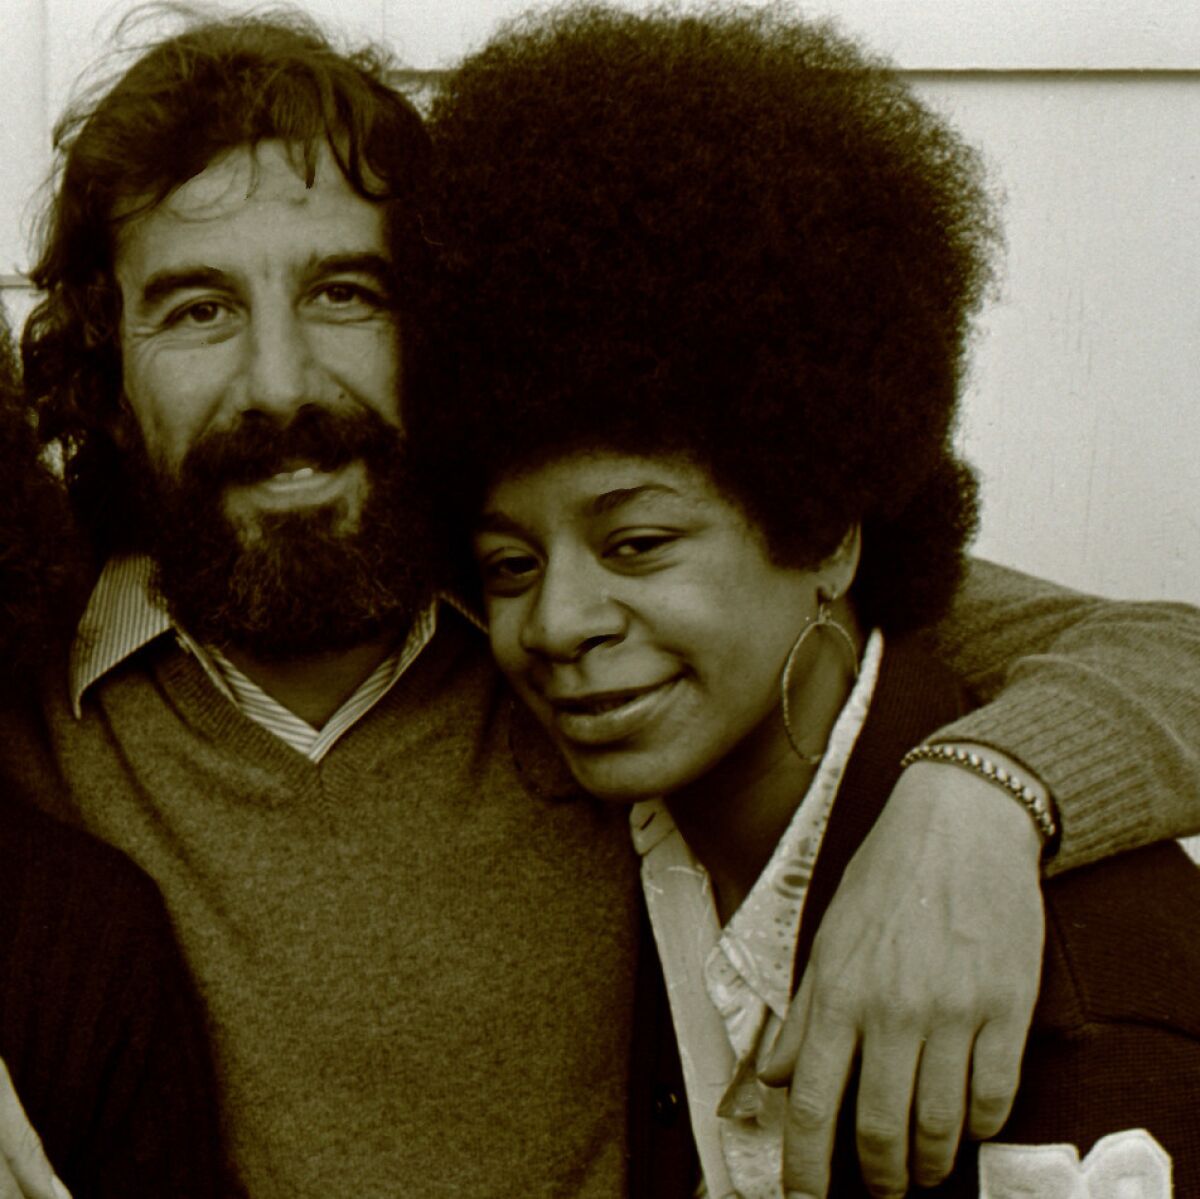 Lou Adler (left) and Merry Clayton